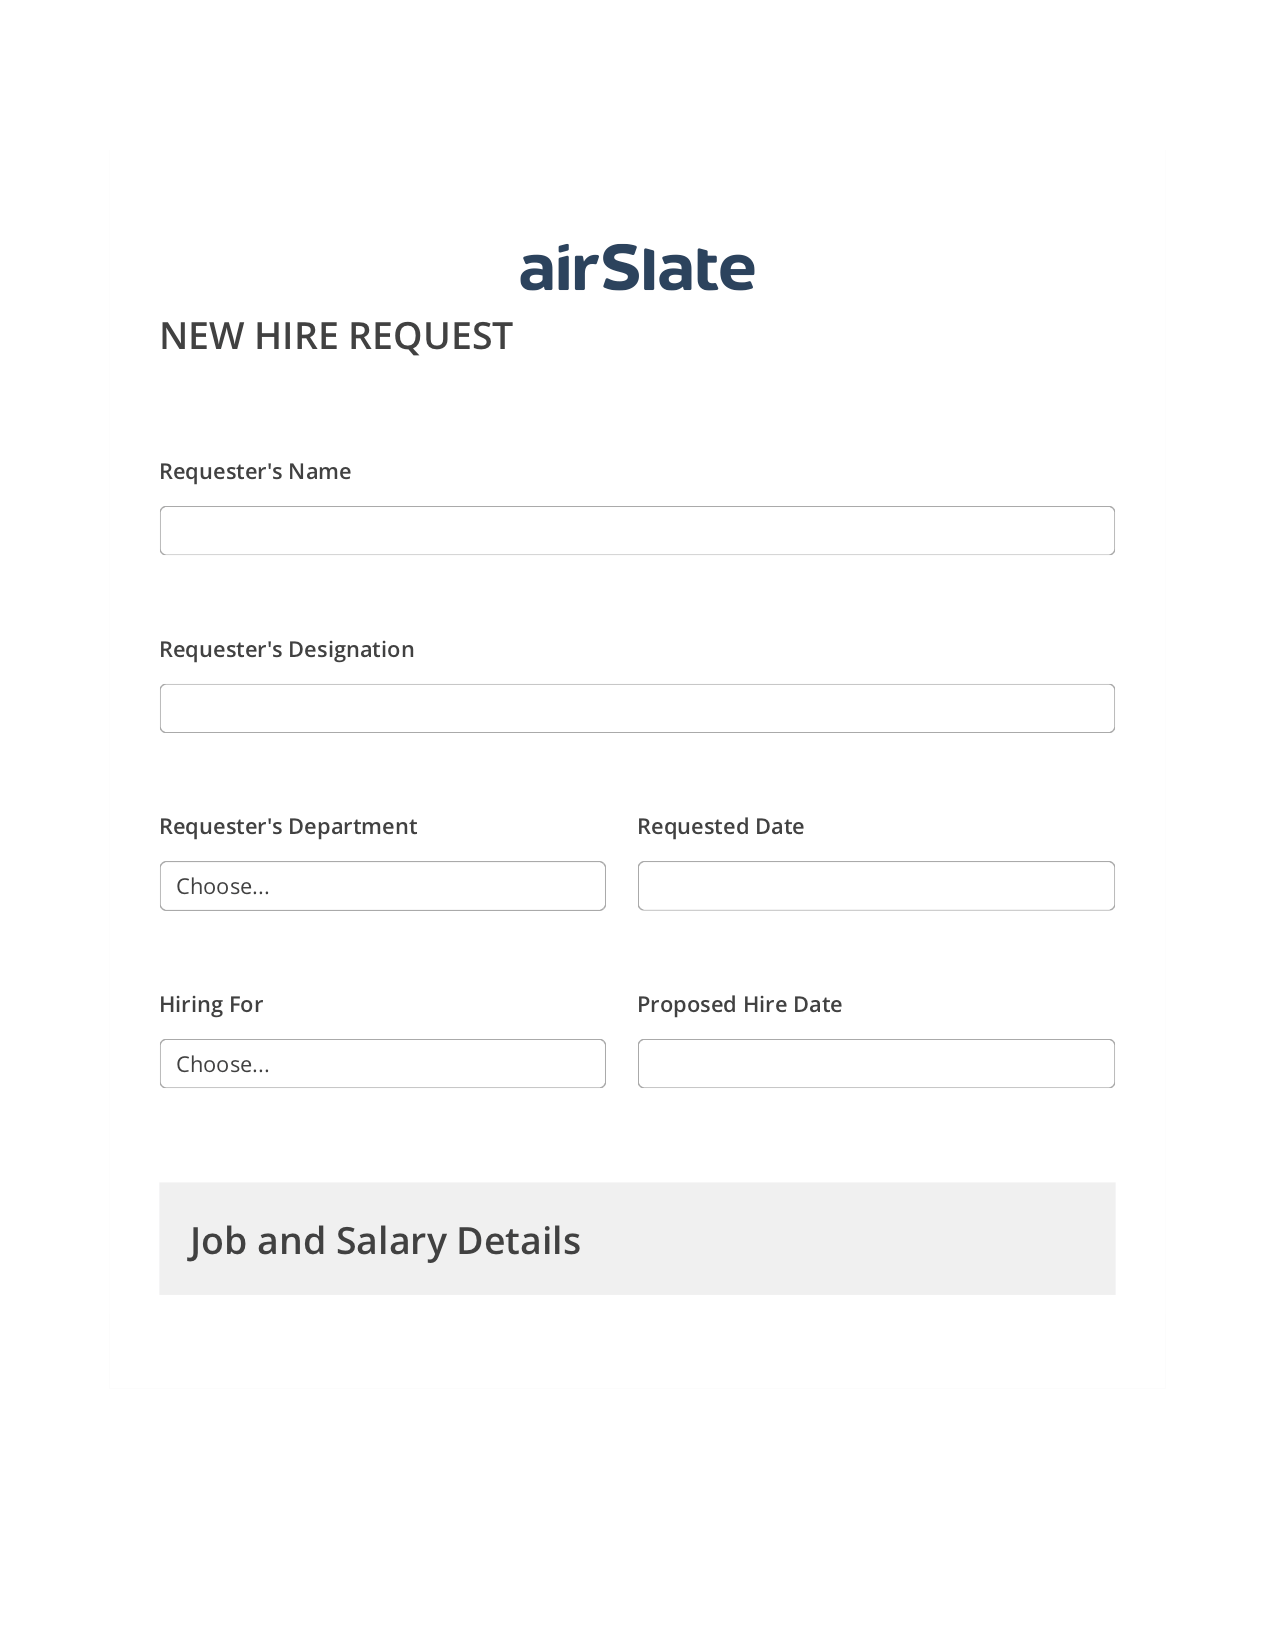 Hiring Request Workflow Pre-fill Dropdowns from MySQL Bot, Create Slate Reminder Bot, Export to Smartsheet